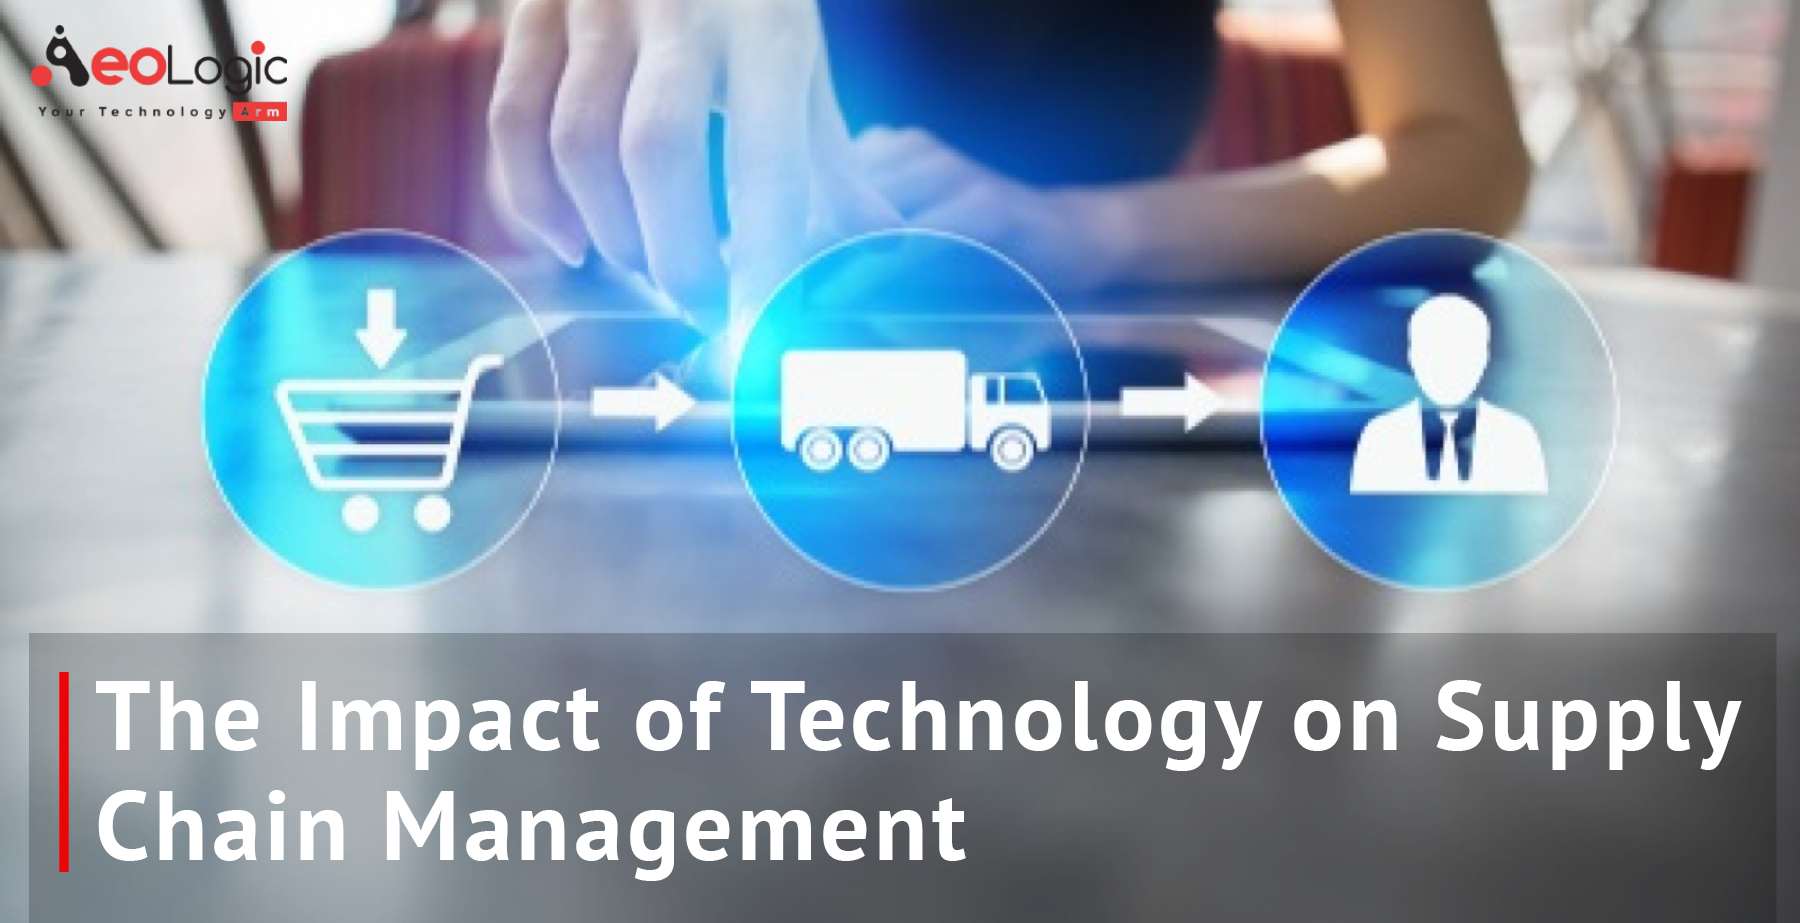 a literature review on the impact of rfid technologies on supply chain management